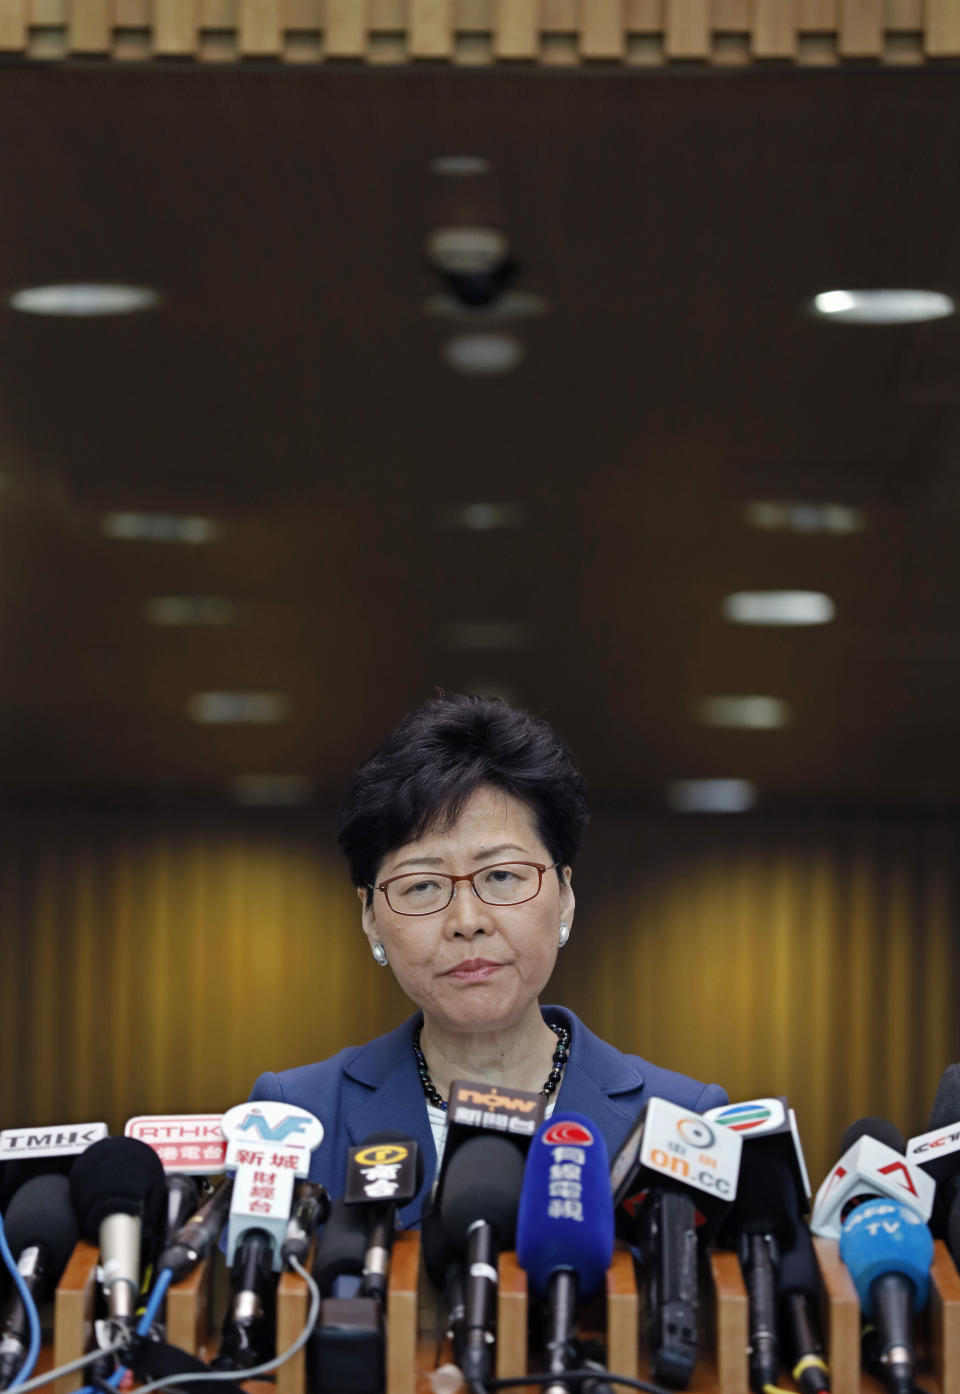 Hong Kong Chief Executive Carrie Lam listens to reporters questions during a press conference in Hong Kong Monday, June 10, 2019. Lam signaled Monday that her government will go ahead with proposed amendments to its extradition laws after a massive protest against them. (AP Photo/Vincent Yu)